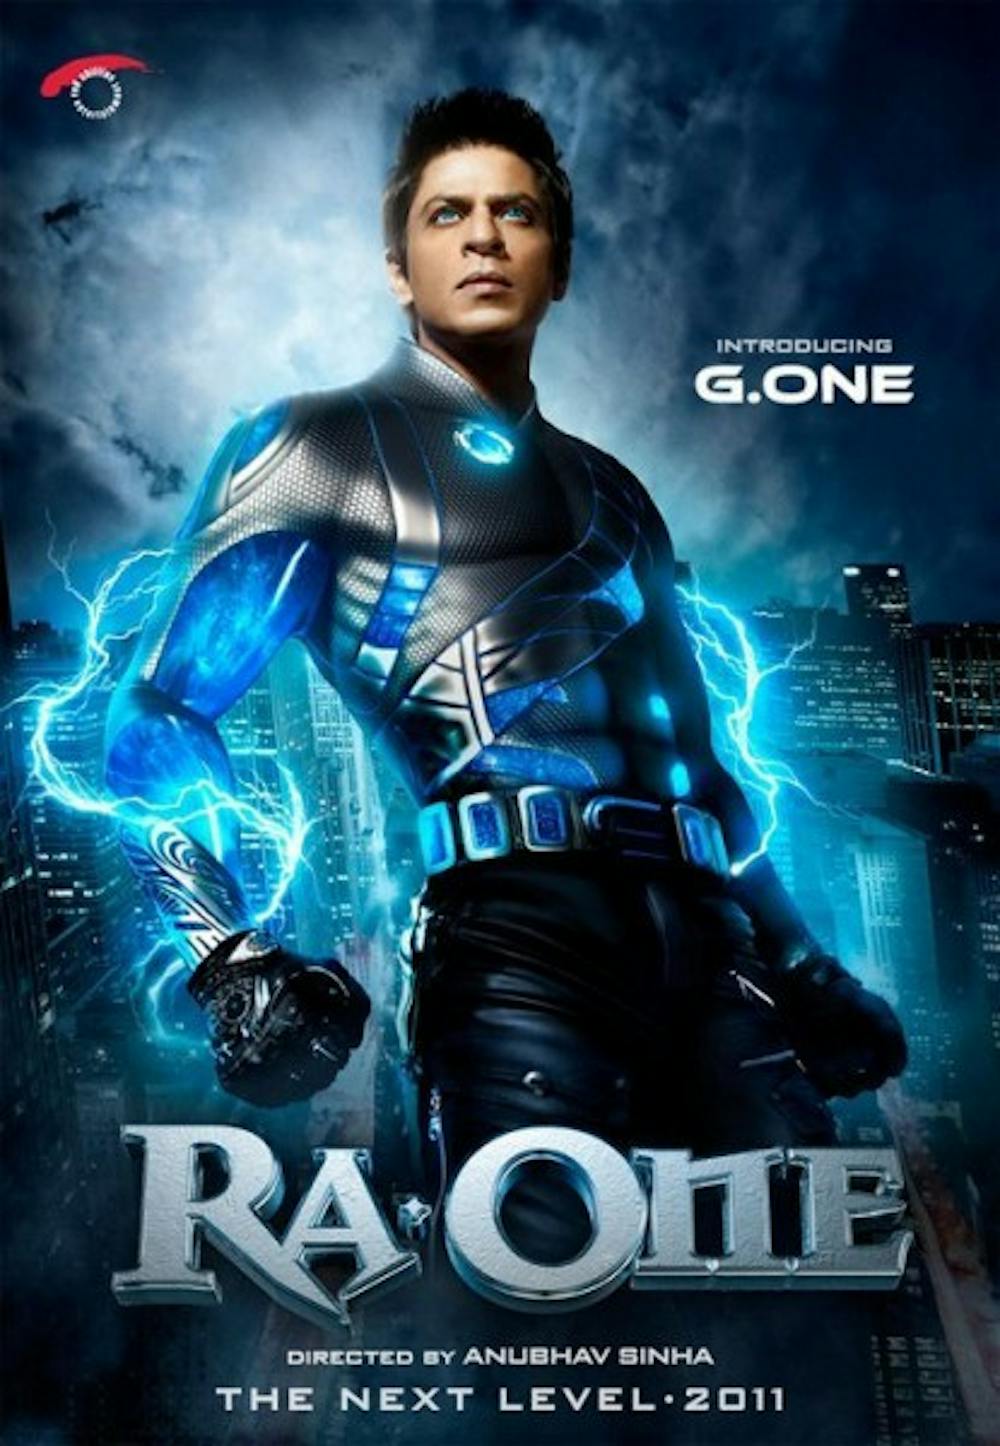 <p>The upcoming film "Ra.One" is being marketed as India's first superhero film, but Bollywood's heroes are already larger-than-life characters.</p>